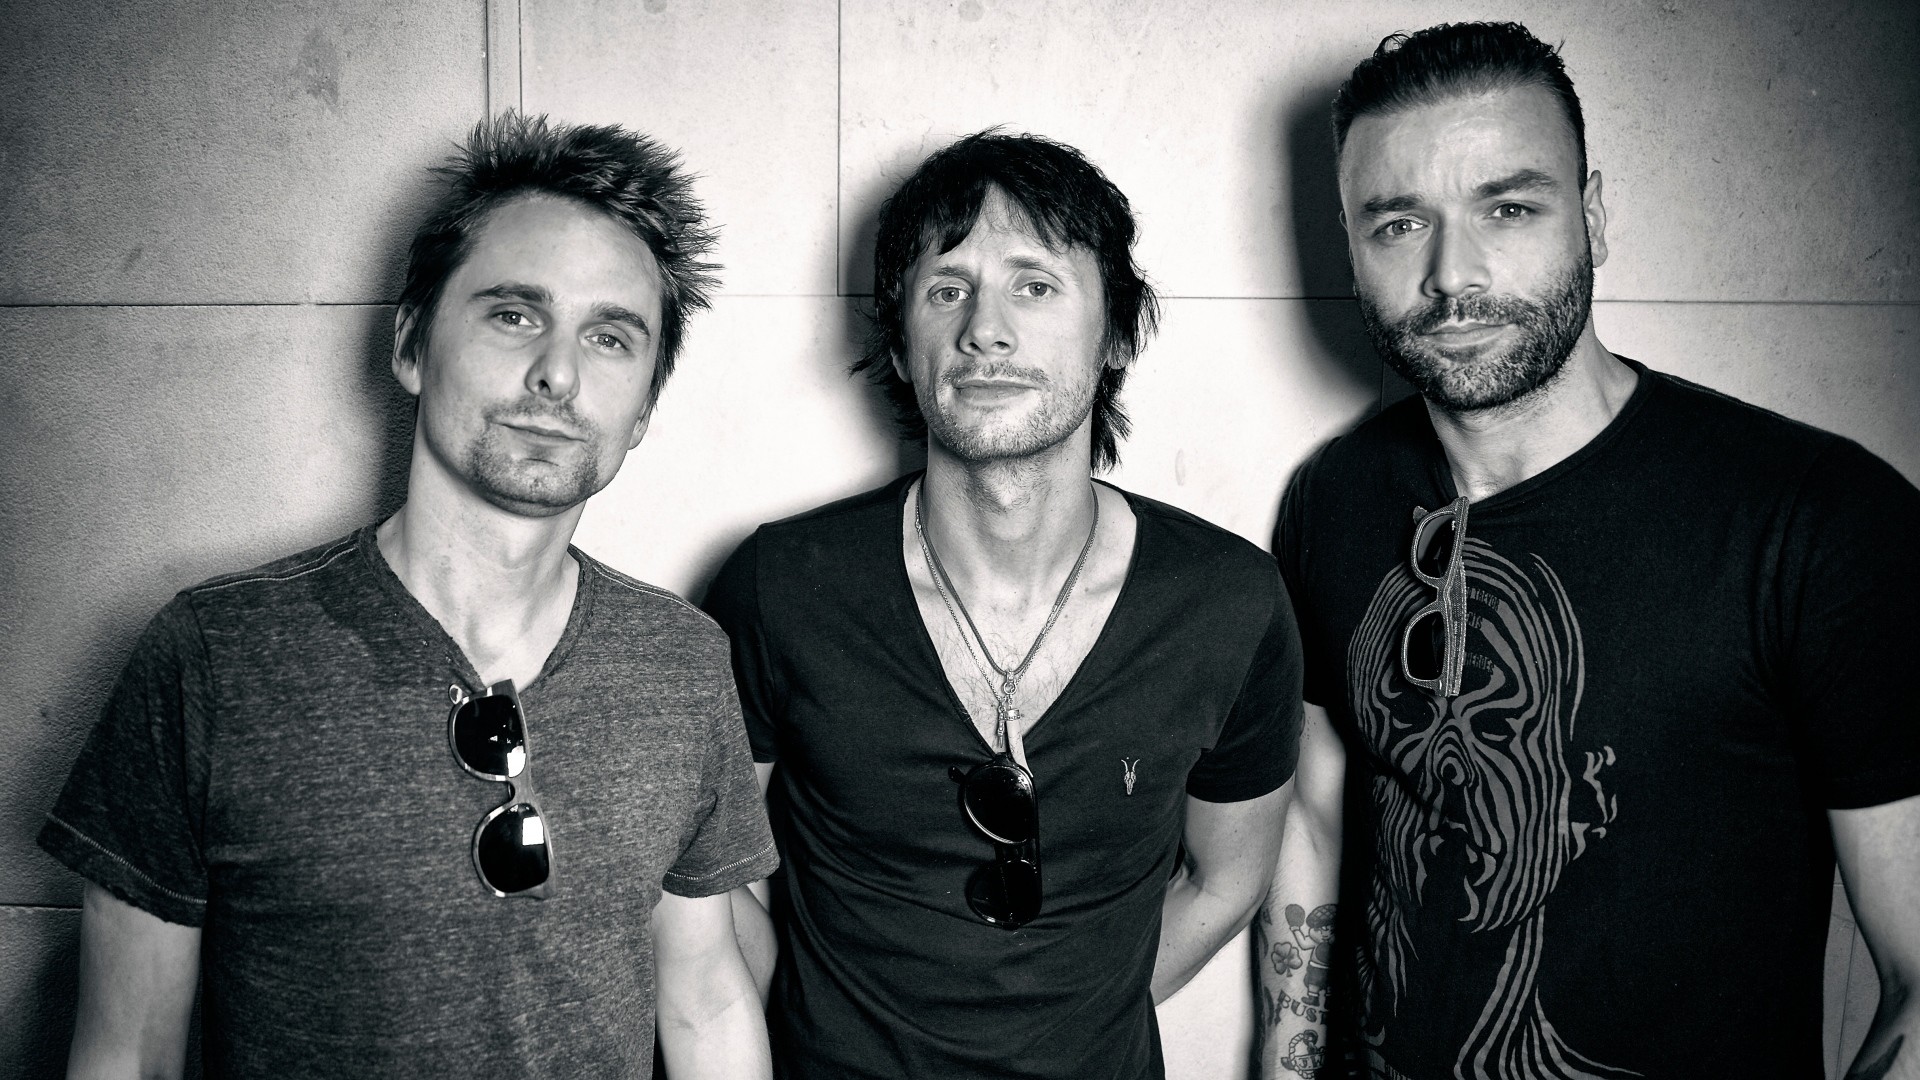 1920x1080 HDWP Muse Wallpaper Muse Collection of Widescreen Wallpapers